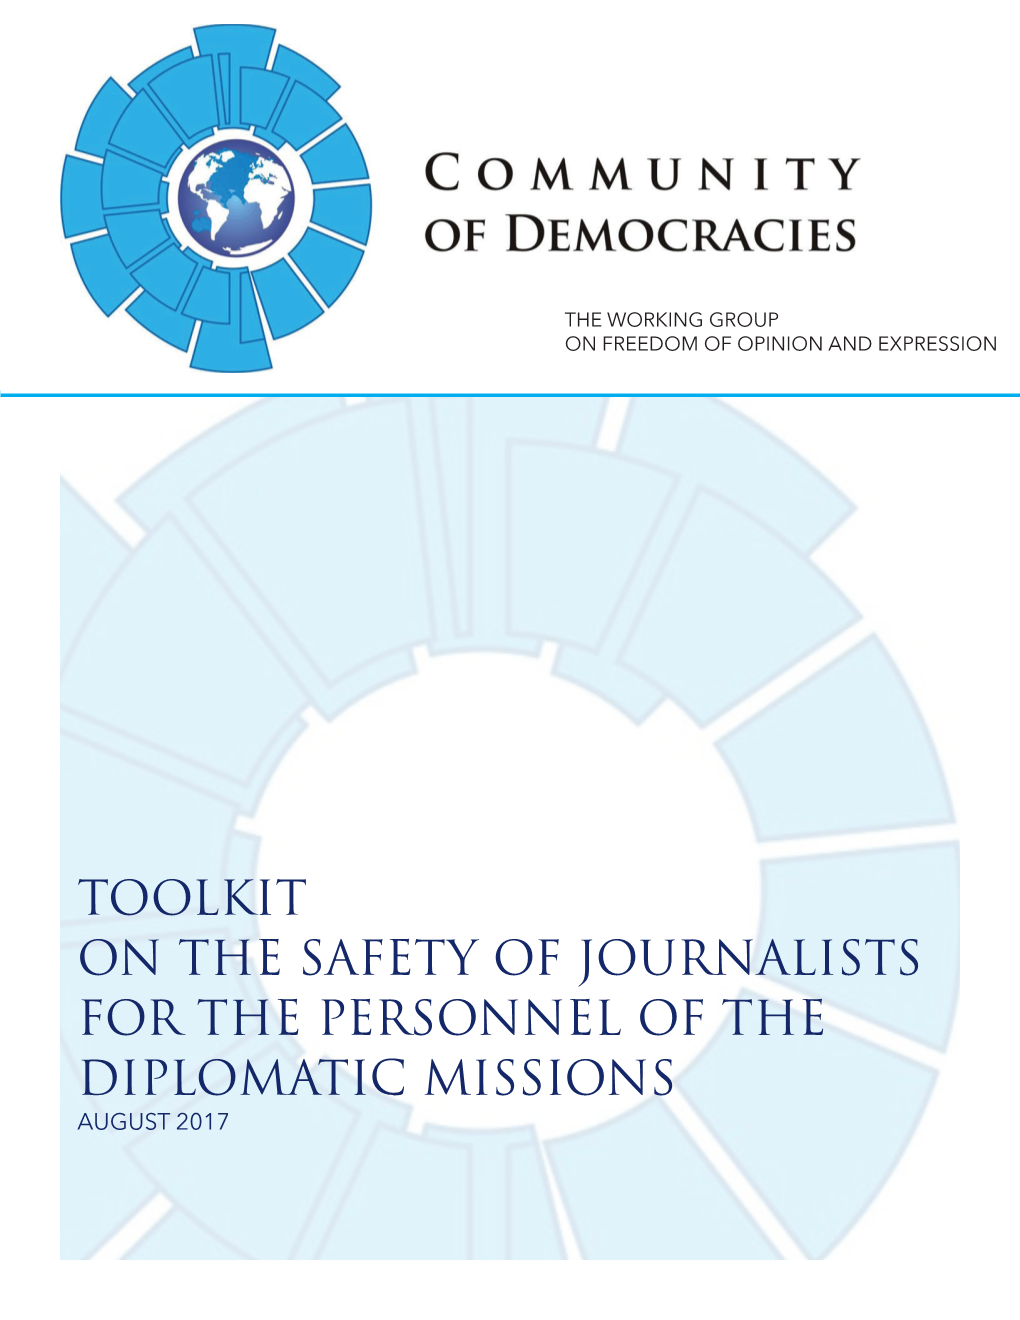 Toolkit on the Safety of Journalists for the Personnel for the Diplomatic